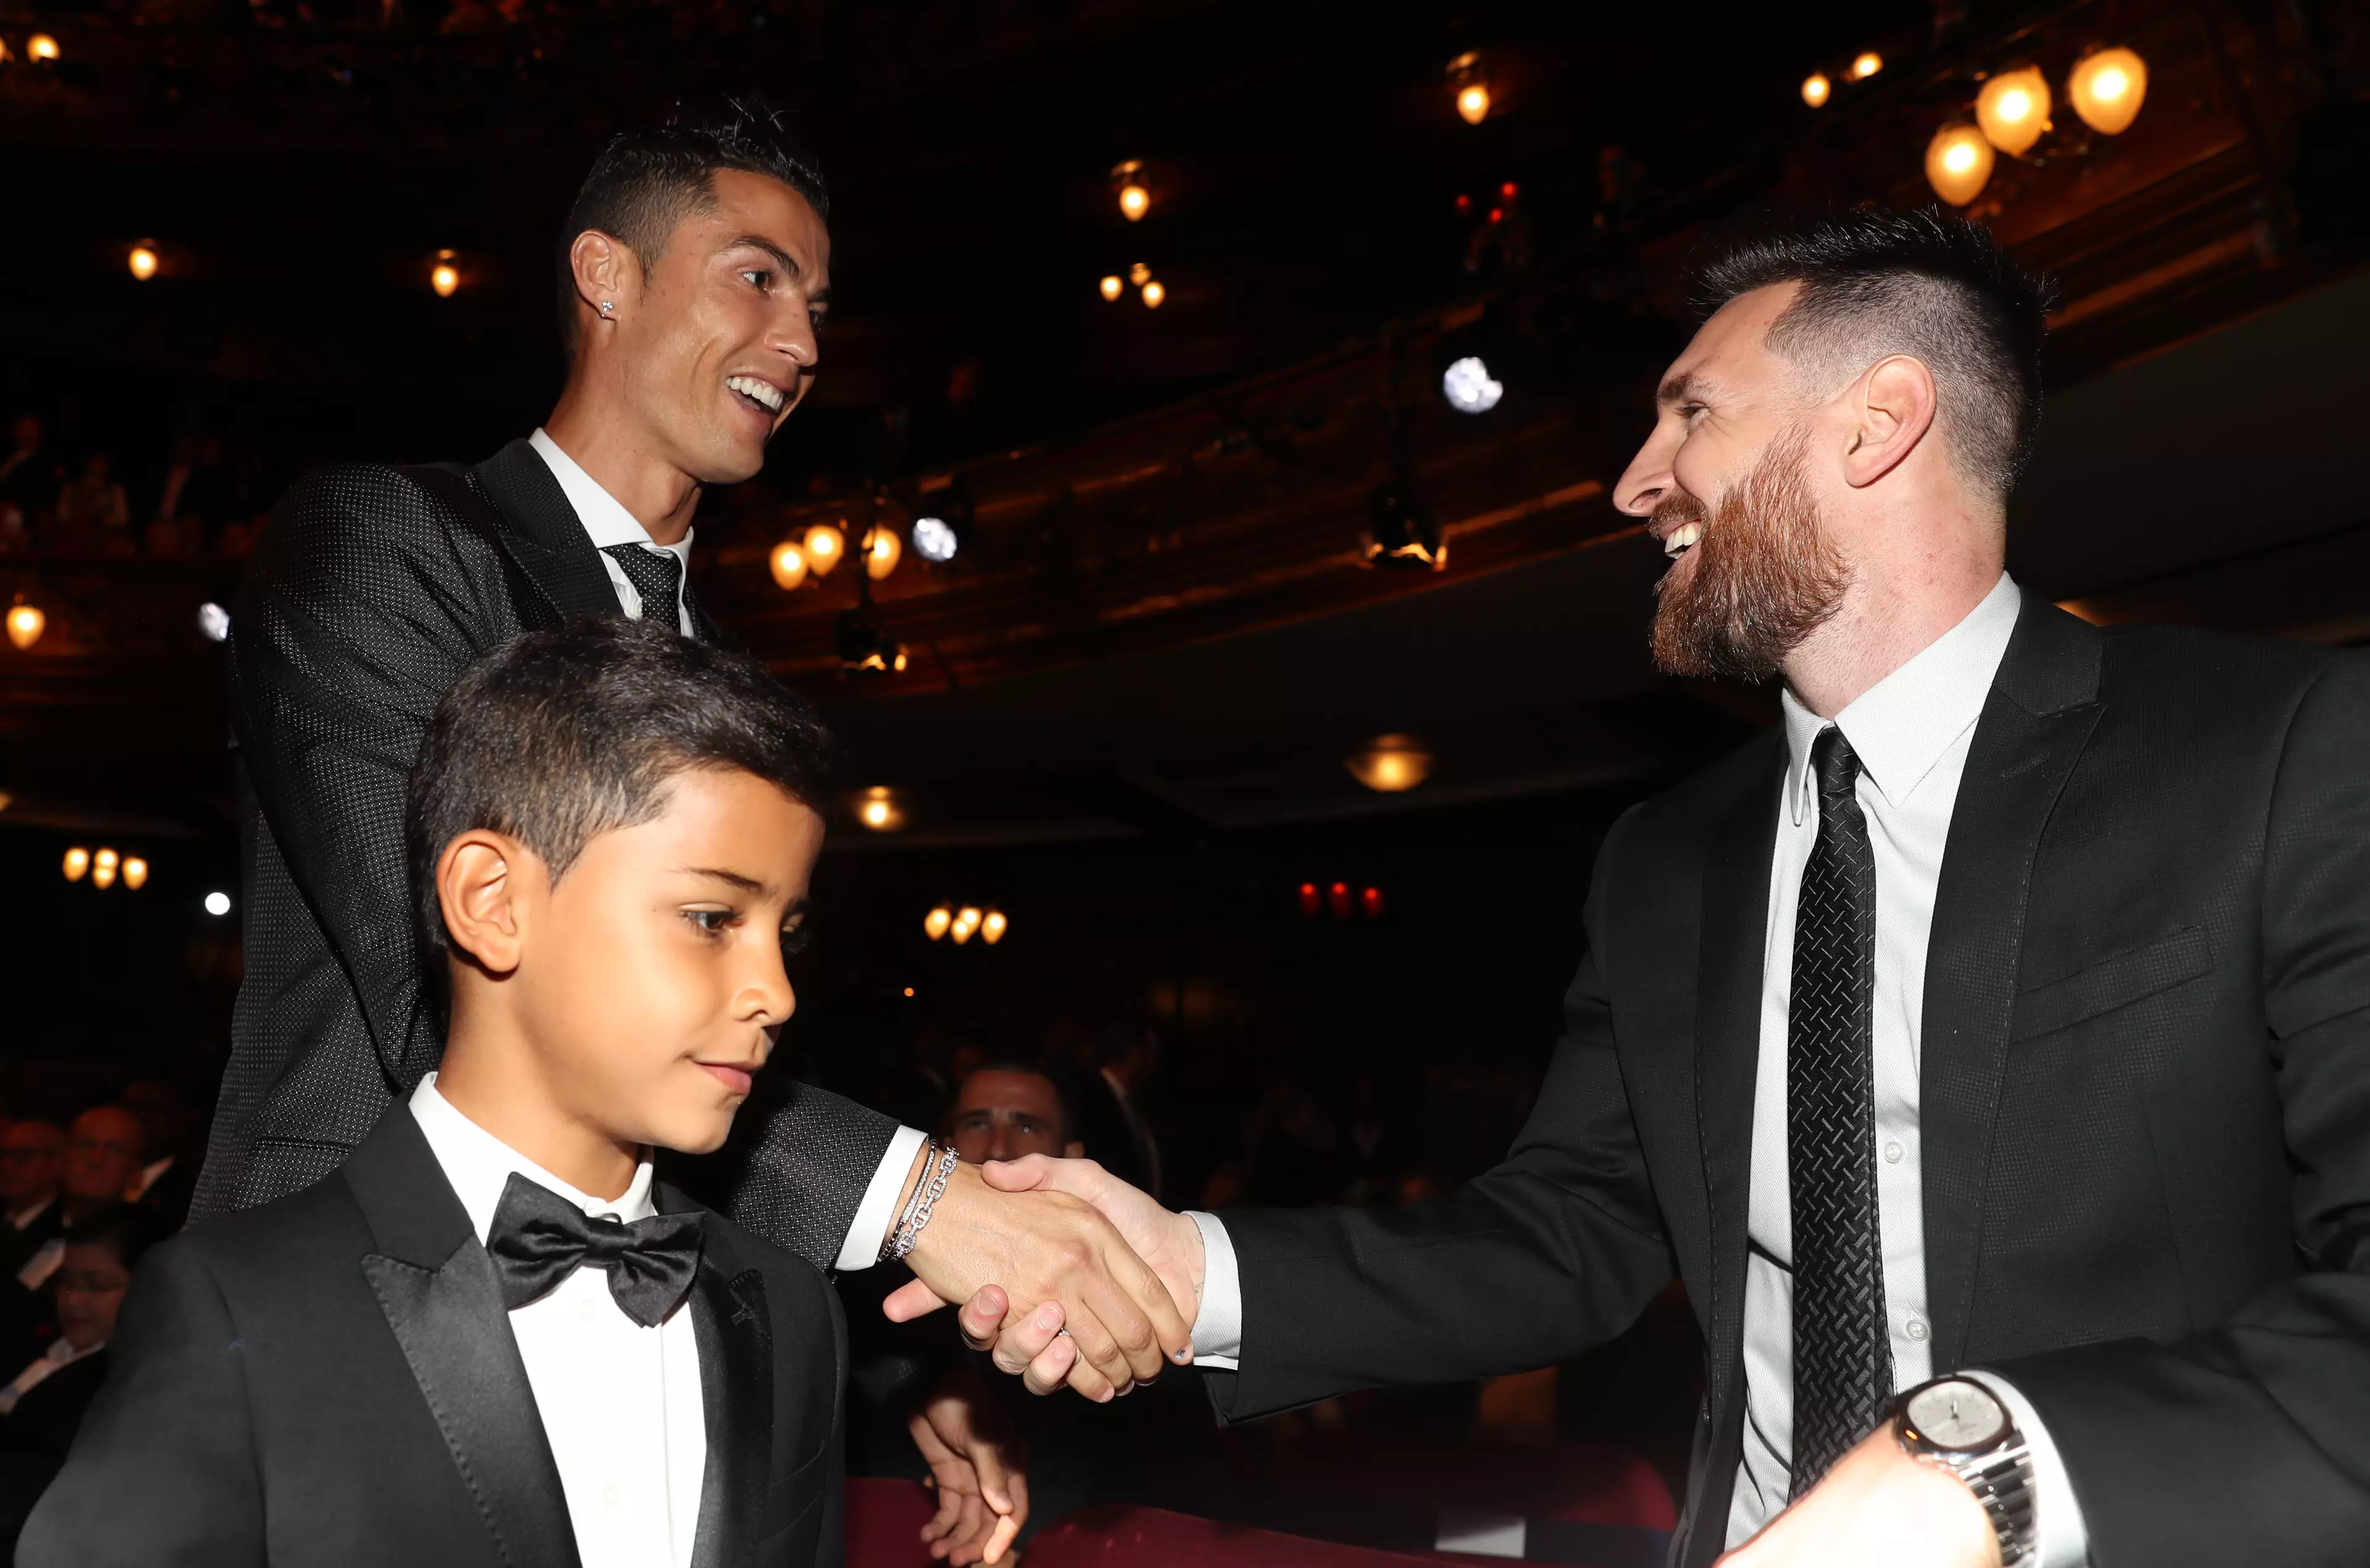 Ronaldo laughing because he doesn't agree with the results, Messi laughing because he does. Image: PA Images